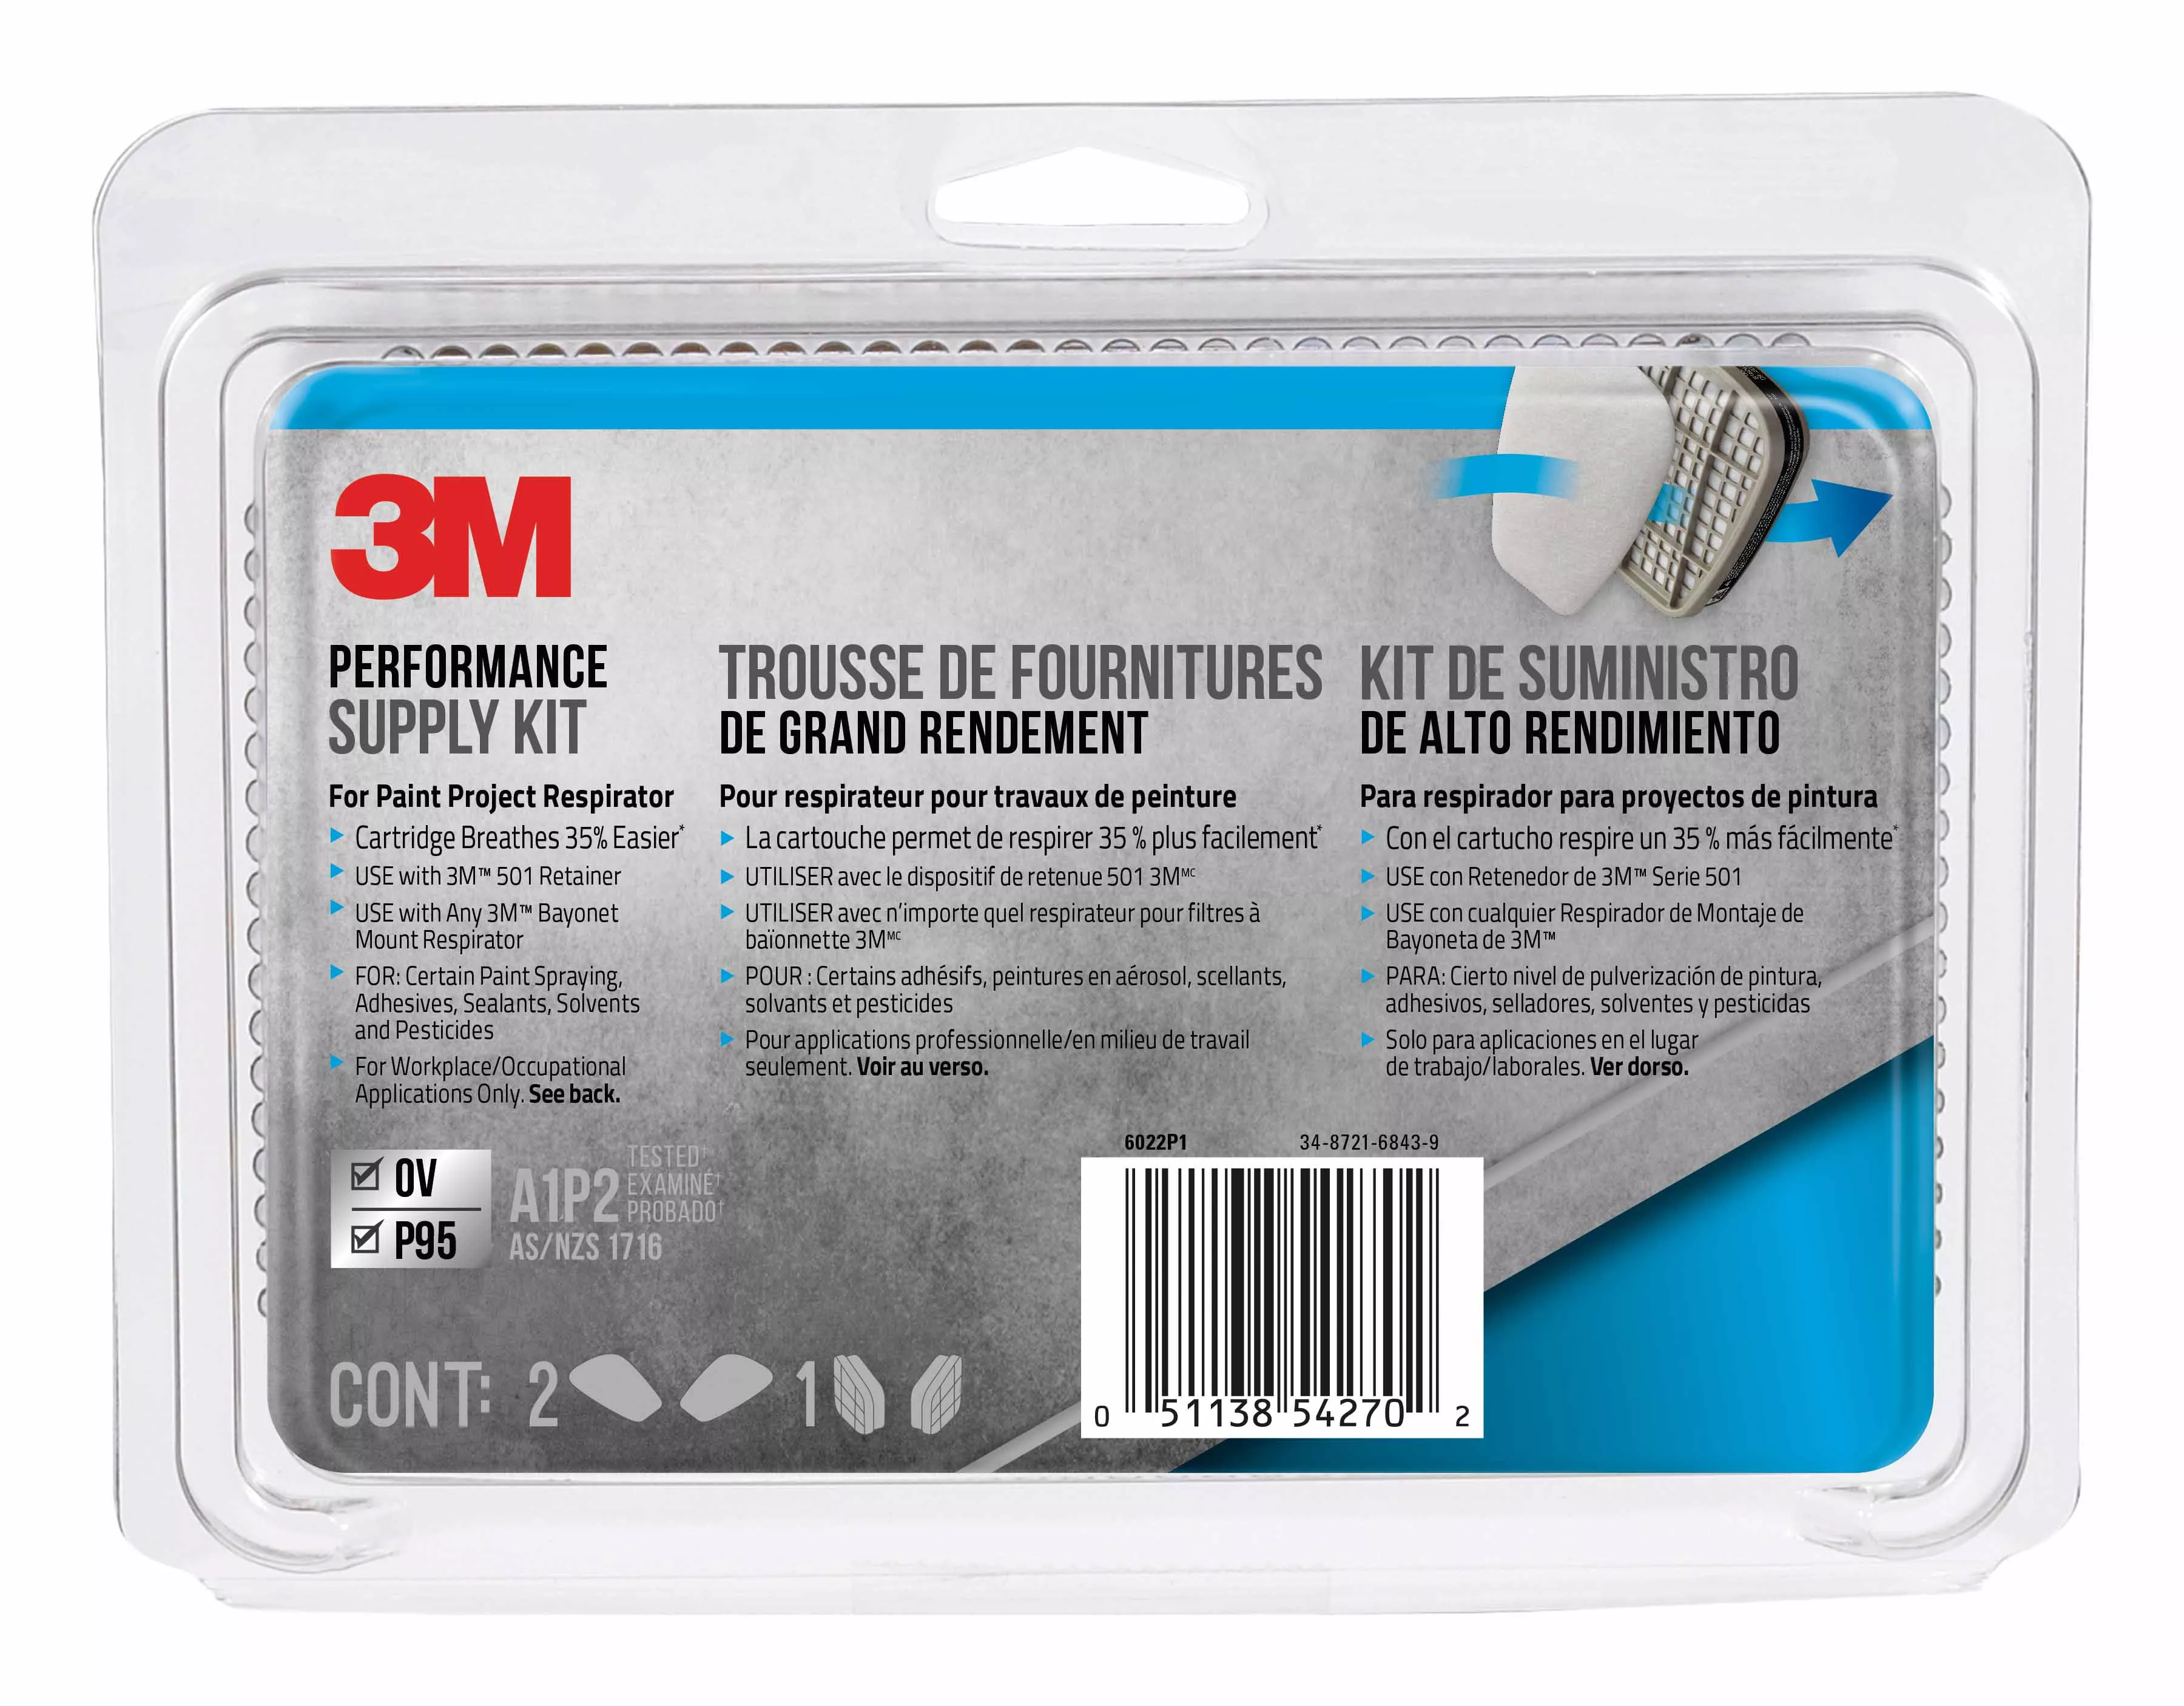 3M™ Performance Supply Kit for the Paint Project Respirator OV/P95,
6022P1-DC, 1 kit/pack, 5 packs/case